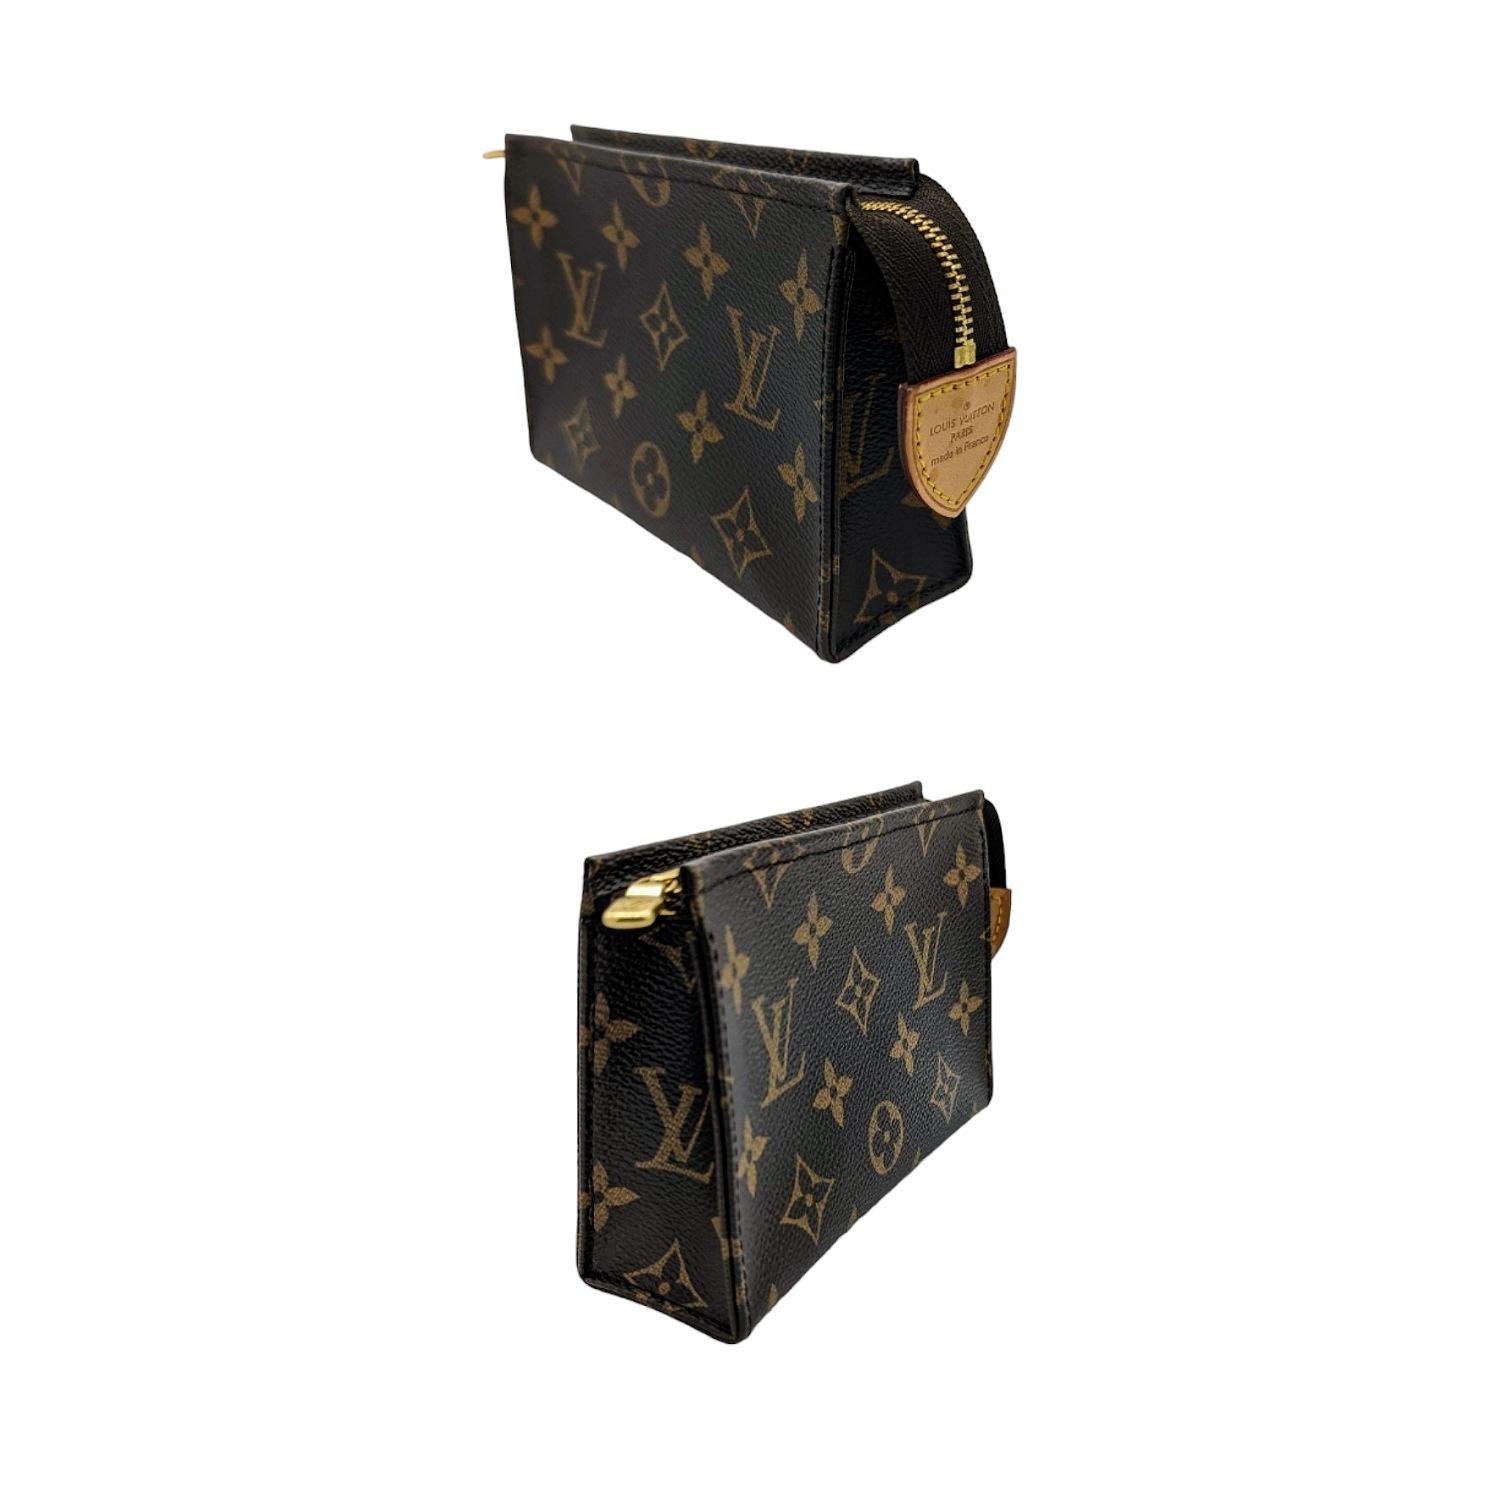 Louis Vuitton Monogram Toiletry 15 Pouch Cosmetic Case In Excellent Condition For Sale In Scottsdale, AZ